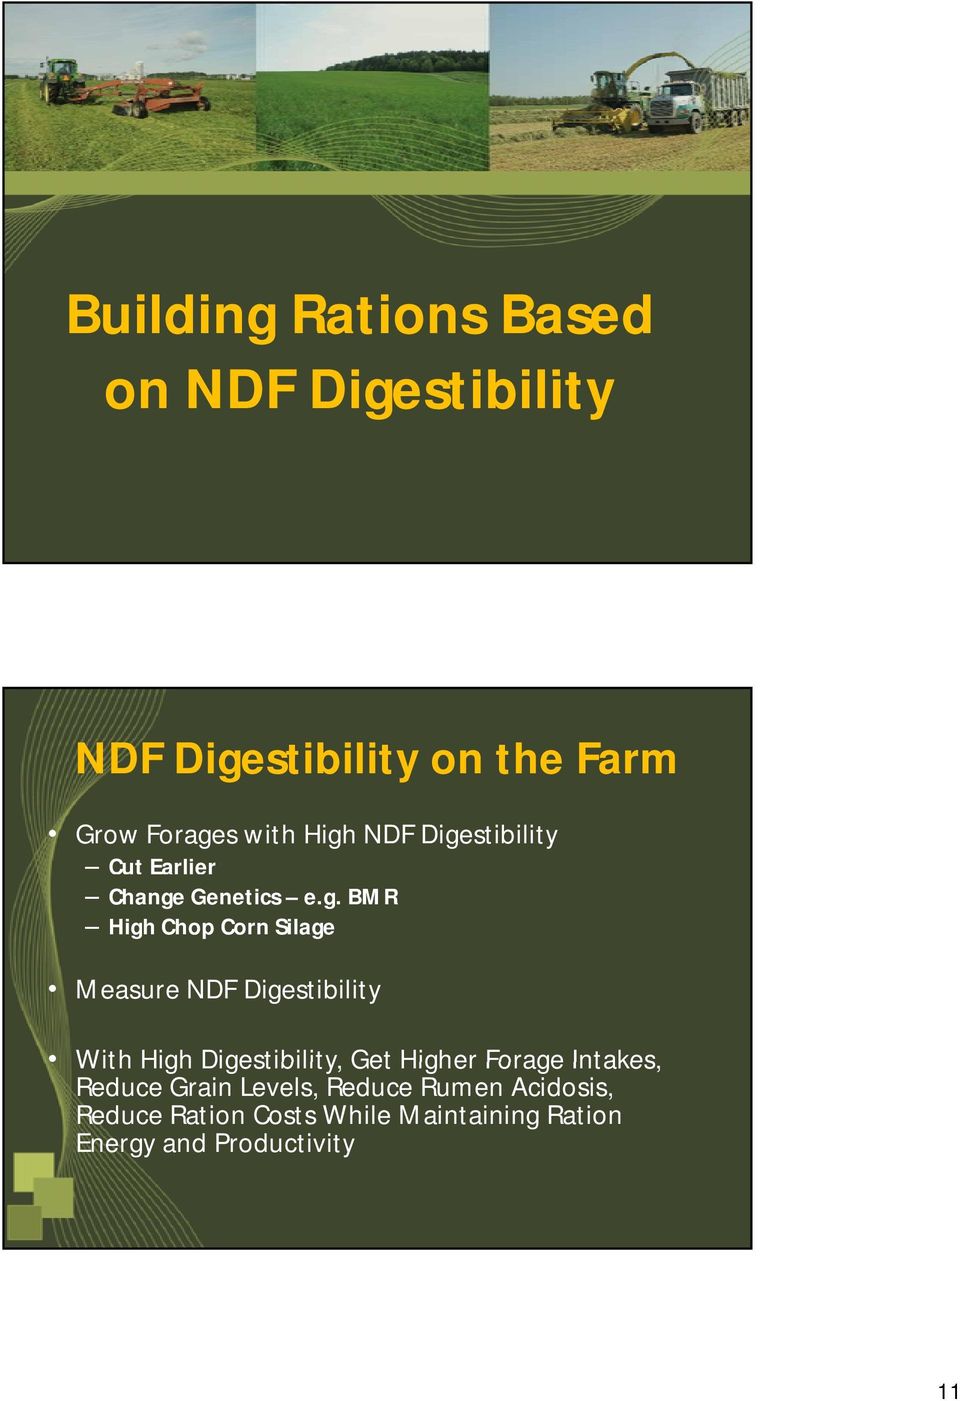 High Digestibility Get Higher Forage Intakes With High Digestibility, Get Higher Forage Intakes, Reduce